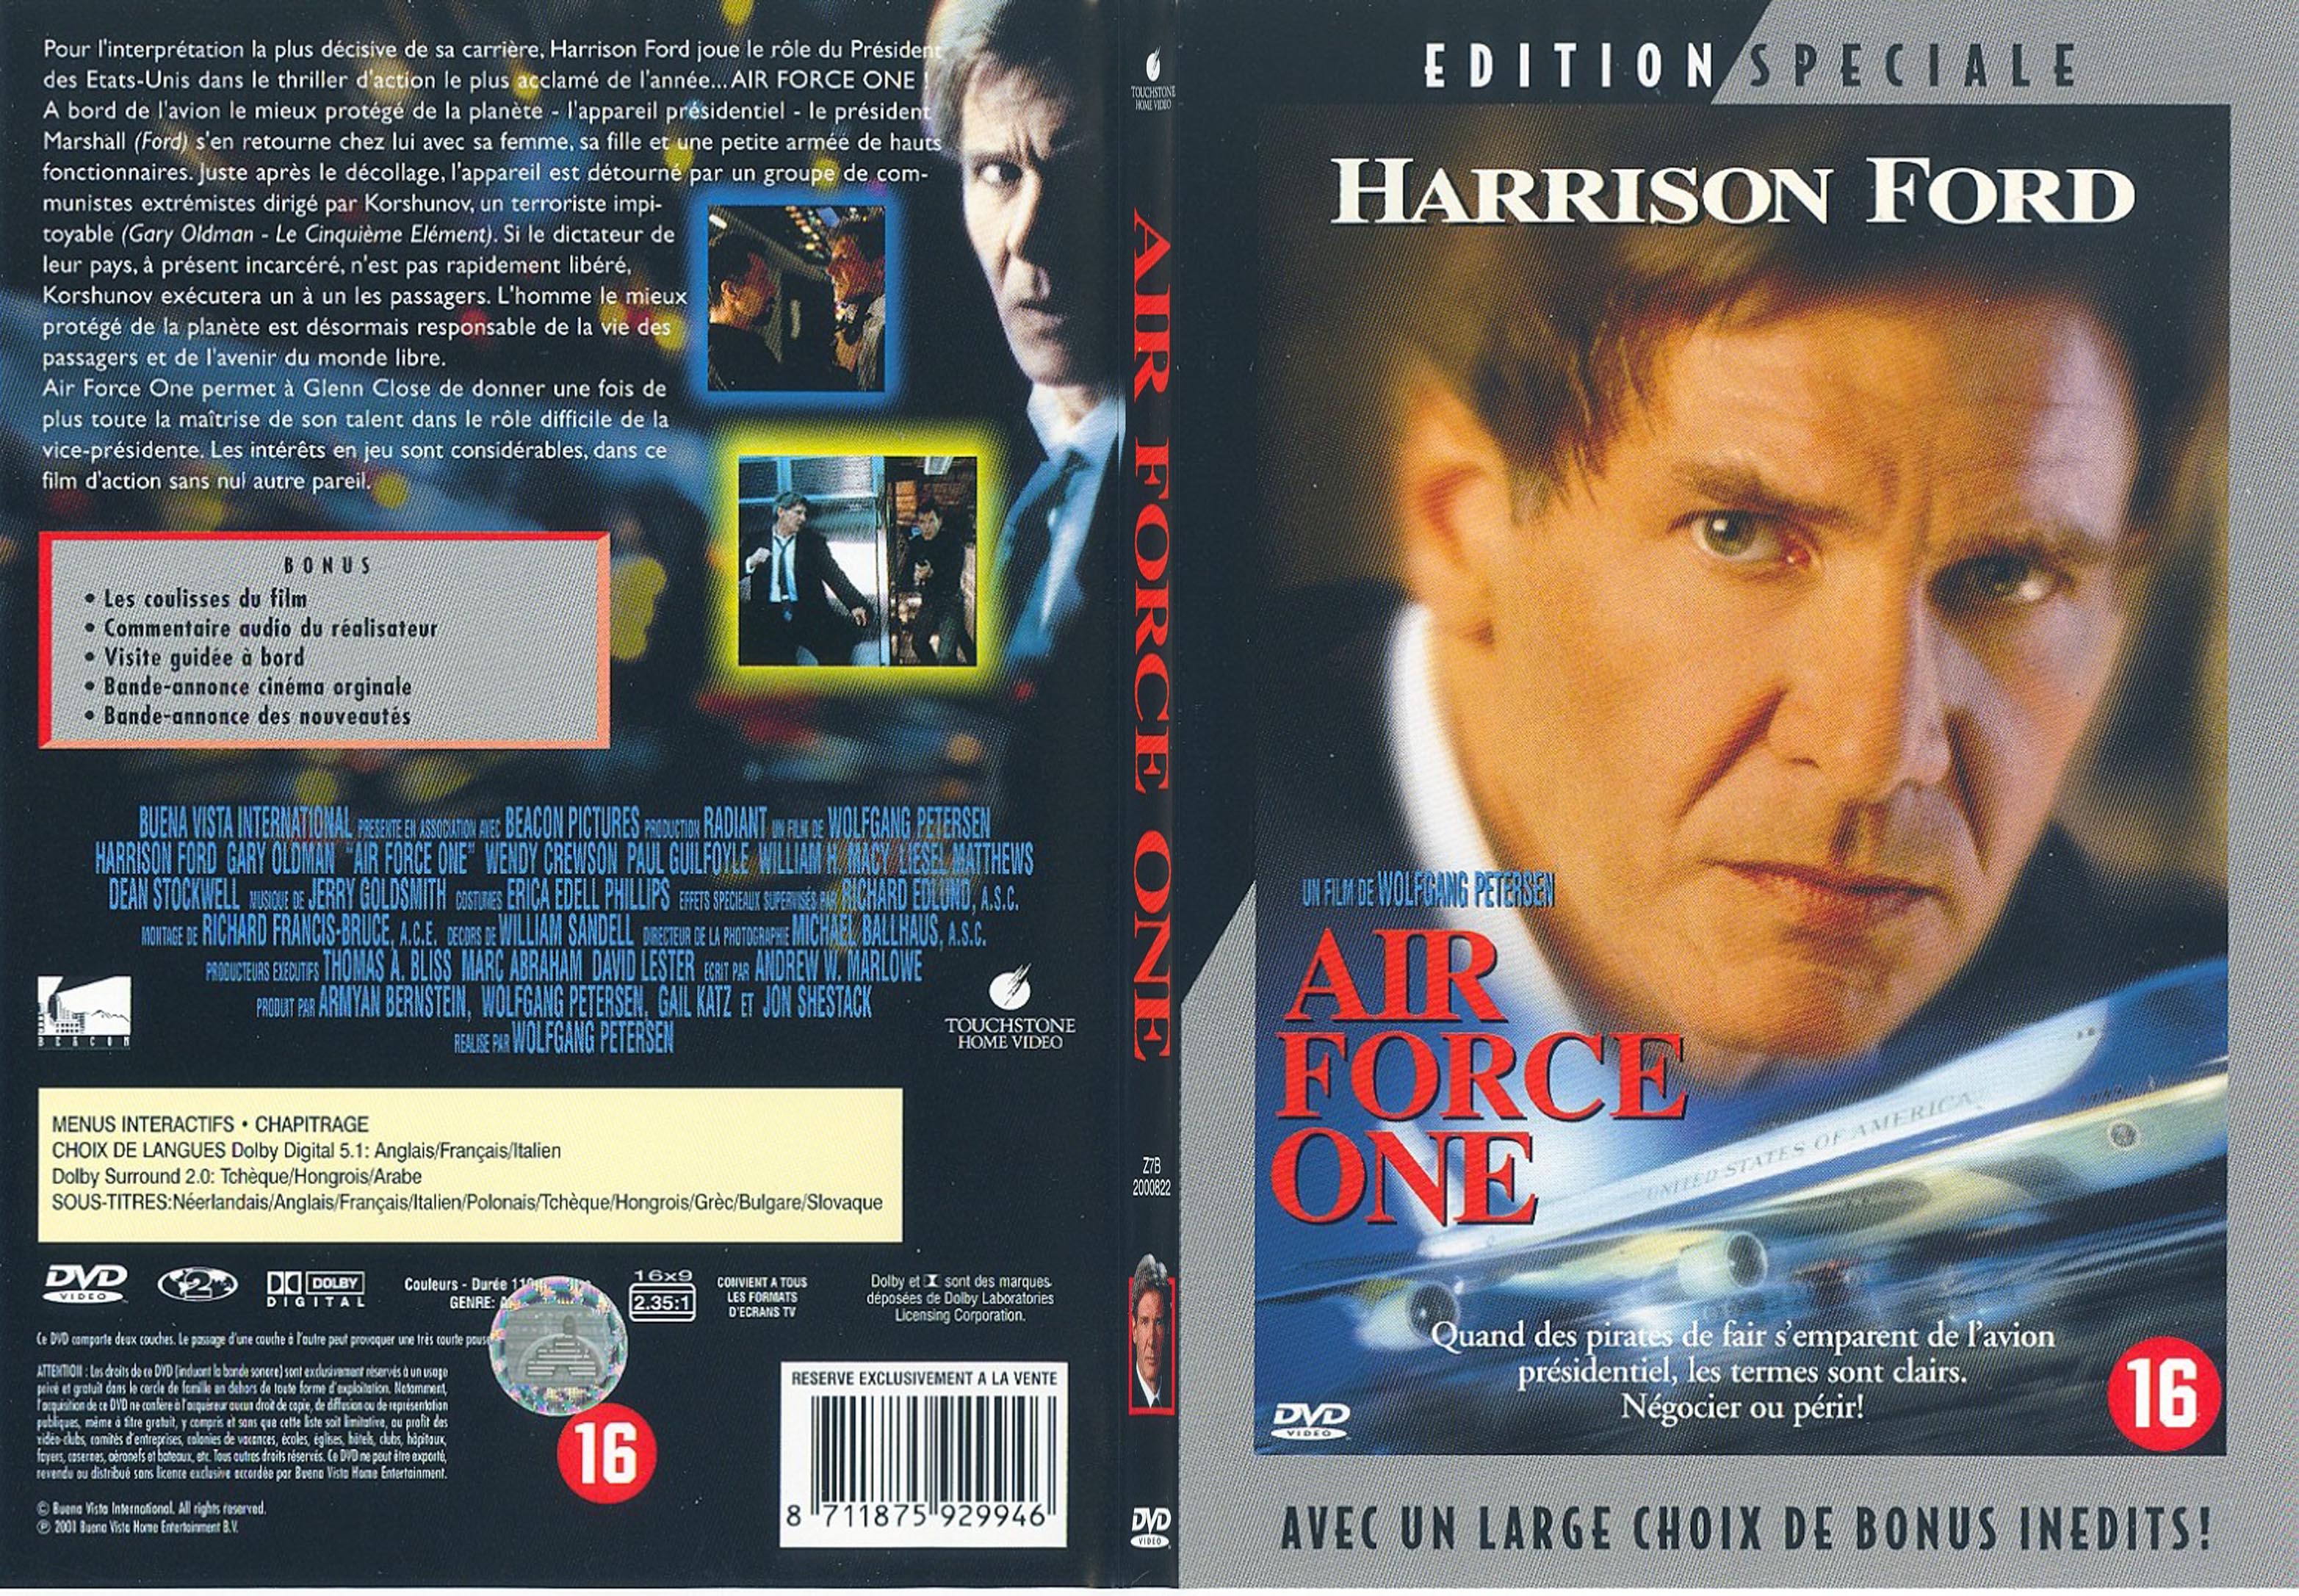 Jaquette DVD Air force one - SLIM v2